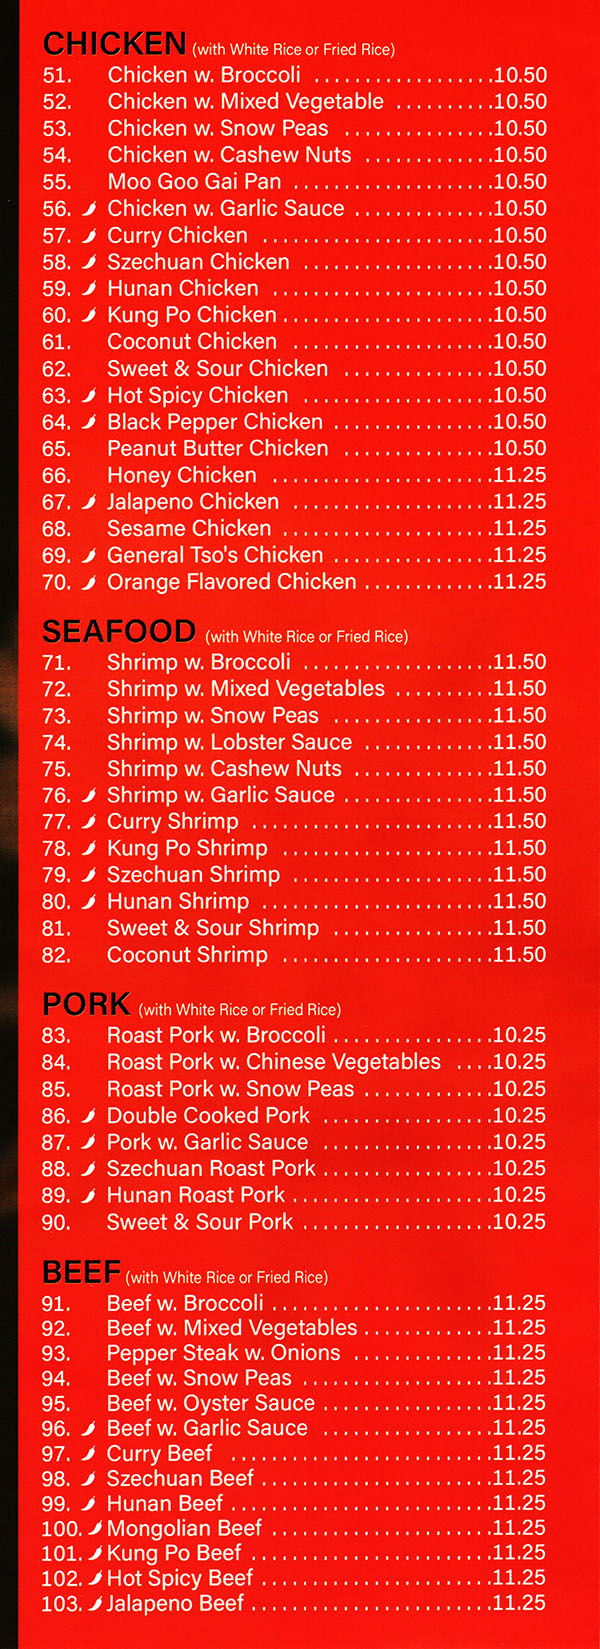 China Garden Chinese Restaurant Menu Page 3
SWEET & SOUR
(with White Rice) (Sauce on the Side)
45. Sweet & Sour Pork $8.50
46. Sweet & Sour Chicken $8.50
47. Sweet & Sour Shrimp $9.25
CHICKEN <with white Rice)
48. Chicken w. Broccoli $8.75
49. Chicken w. Mixed Vegetable $8.75
50. Chicken w. Snow Peas $8.75
51. Chicken w. Cashew Nuts $8.75
52. Moo Goo Gai Pan $8.75
53. Chicken w. Garlic Sauce $8.75
54. Curry Chicken $8.75
55. Szechuan Chicken $8.75
56. Hunan Chicken $8.75
57. Chicken w. String Bean $8.75
58. Kung Po Chicken $8.75
SEAFOOD (with white Rice)
59. Shrimp w. Broccoli $9.50
60. Shrimp w. Mixed Vegetable $9.50
61. Shrimp w. Snow Peas $9.50
62. Shrimp w. Lobster Sauce $9.50
63. Shrimp w. Cashew Nuts $9.50
64. Shrimp w. Garlic Sauce $9.50
65. Curry Shrimp $9.50
66. Kung Po Shrimp $9.50
67. Szechuan Shrimp $8.99
68. Hunan Shrimp $9.50
PORK. (with White Rice)
69. Roast Pork w. Broccoli $8.50
70. Roast Pork w. Chinese Vegetable $8.50
71. Roast Pork w. Snow Peas $8.50
72. Double Cooked Pork $8.50
73. Shredded Pork w. Garlic Sauce $$8.50
74. Szechuan Roast Pork $8.50
75. Hunan Roast Pork $8.50
BEEF (with White Rice)
76. Beef w. Broccoli $9.25
77. Beef w. Mixed Vegetable $9.25
78. Pepper Steak w. Onions $9.25
79. Beef w. Snow Peas $9.25
80. Beef w. Oyster Sauce $9.25
81. Beef w. Garlic Sauce $9.25
82. Curry Beef $9.25
83. Szechuan Beef $9.25
84. Hunan Beef $9.25
85. Mongolian Beef $9.25
VEGETABLE (with White Rice)
86. Sauteed Broccoli $7.50
87. Mixed Vegetable $7.50
88. Broccoli w. Garlic Sauce $7.50
89. Bean Curd w. Mixed Vegetable $7.50
90. Bean Curd Home Style $7.50
91. Bean Curd w. Garlic Sauce $7.50
92. General Tso's Tofu $7.50
Menu Provided By: Metro Dining Delivery www.MetroDiningDelivery.com 402-474-7335